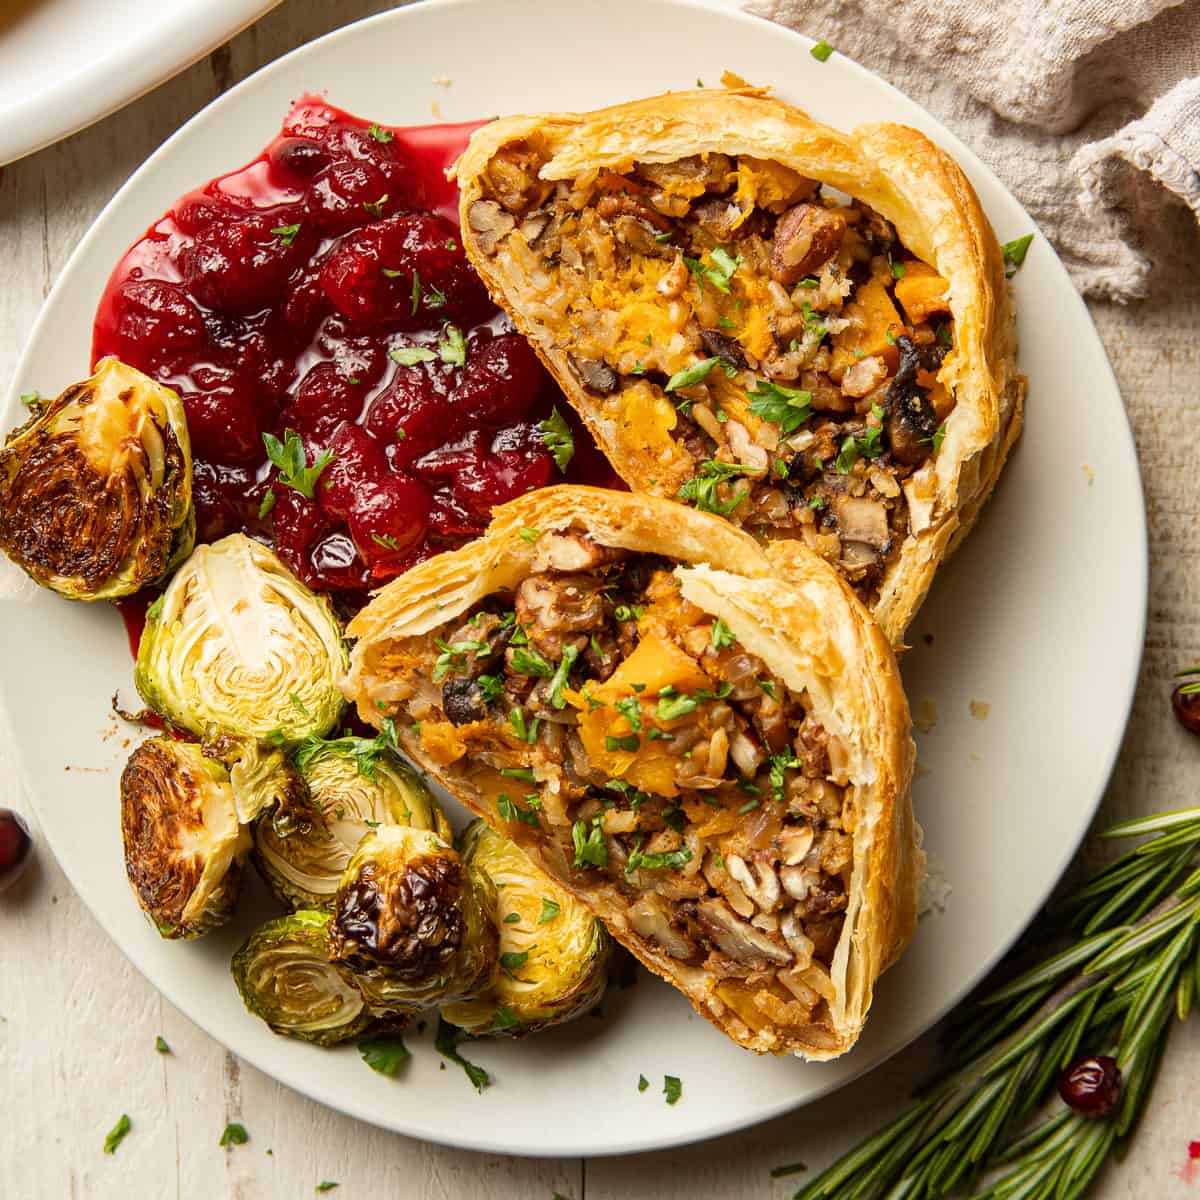 Plate with two slices of Vegetable Wellington, roasted Brussels sprouts and cranberry sauce.